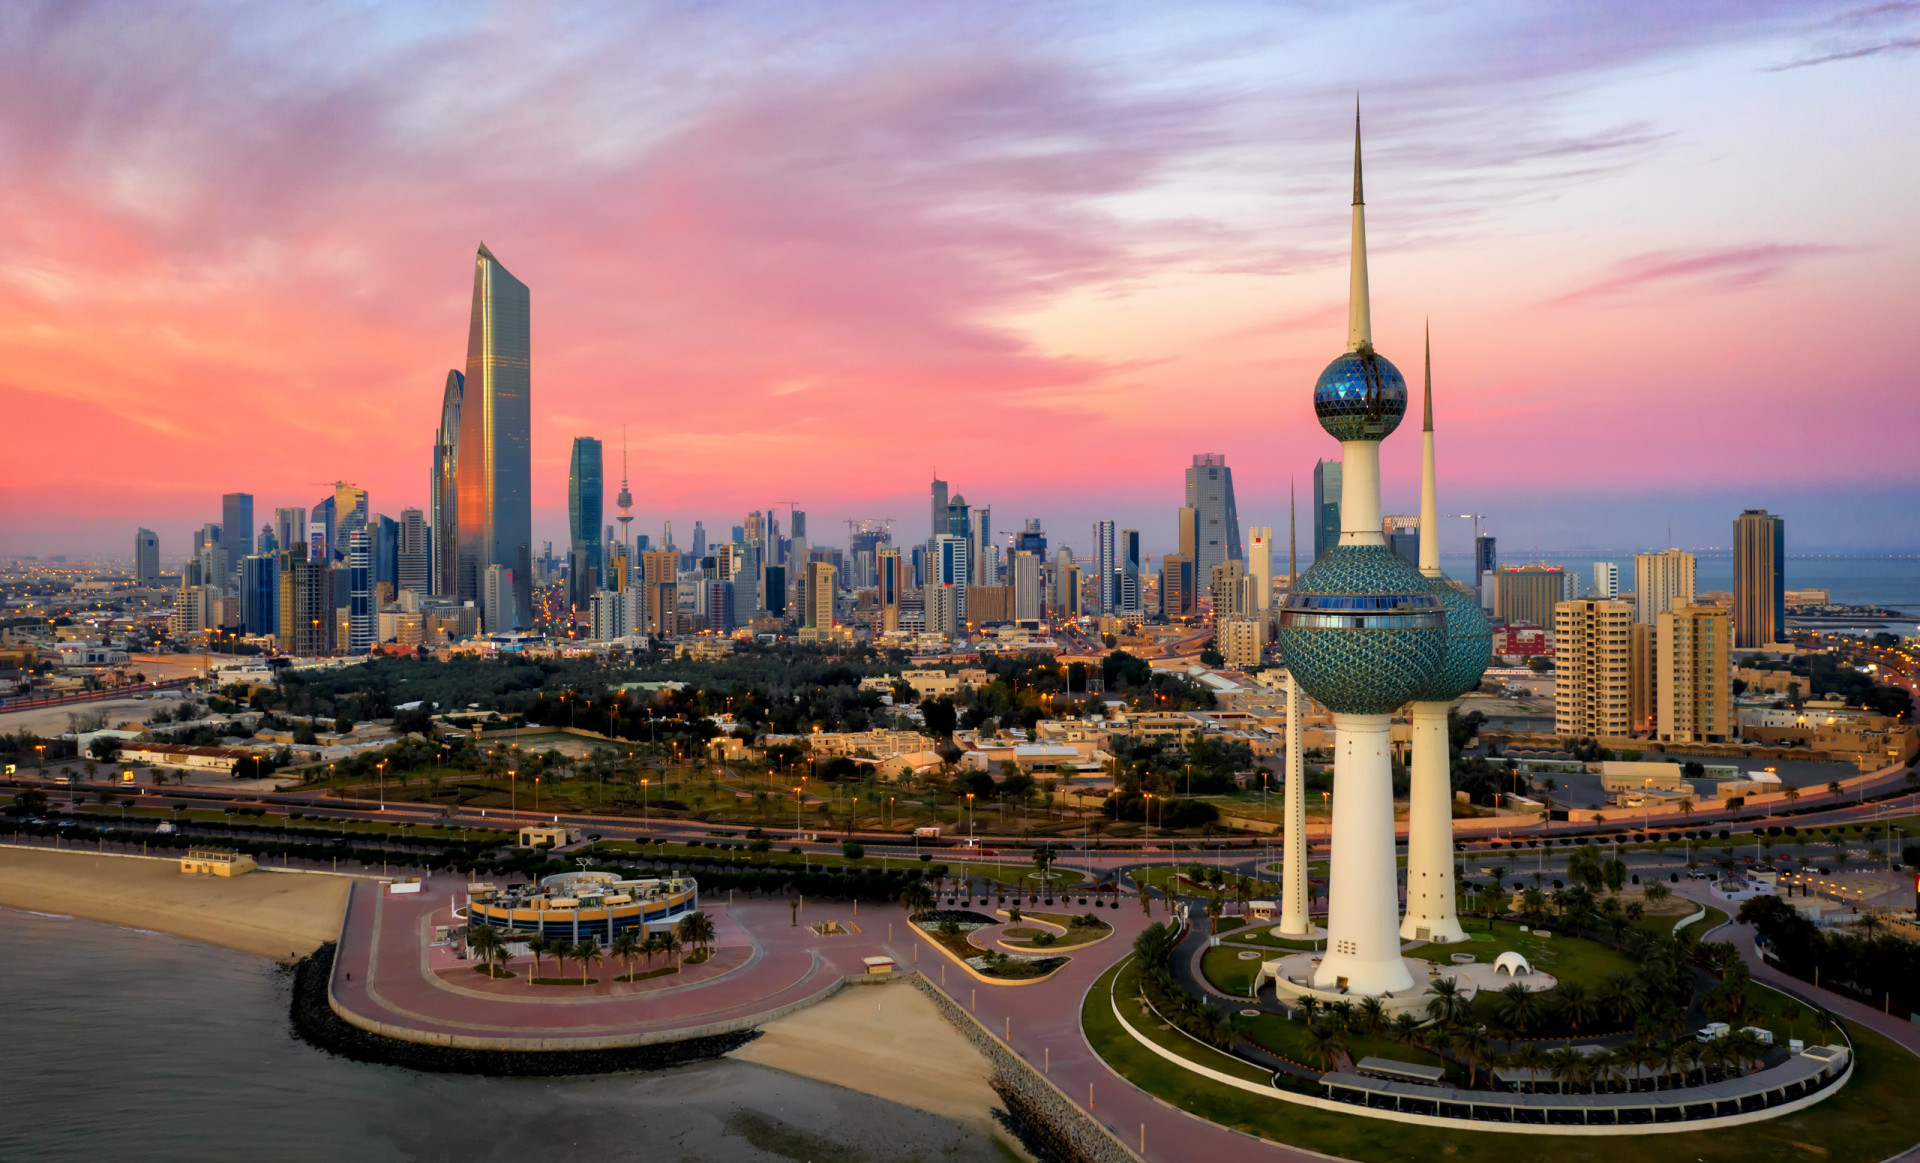 <p>Score: 6.951</p> <p>Kuwait debuts in this year's top spots of the ranking. Kuwait is one of the richest countries in the world.</p><p><a href="https://www.msn.com/en-ca/community/channel/vid-7xx8mnucu55yw63we9va2gwr7uihbxwc68fxqp25x6tg4ftibpra?cvid=94631541bc0f4f89bfd59158d696ad7e">Follow us and access great exclusive content every day</a></p>